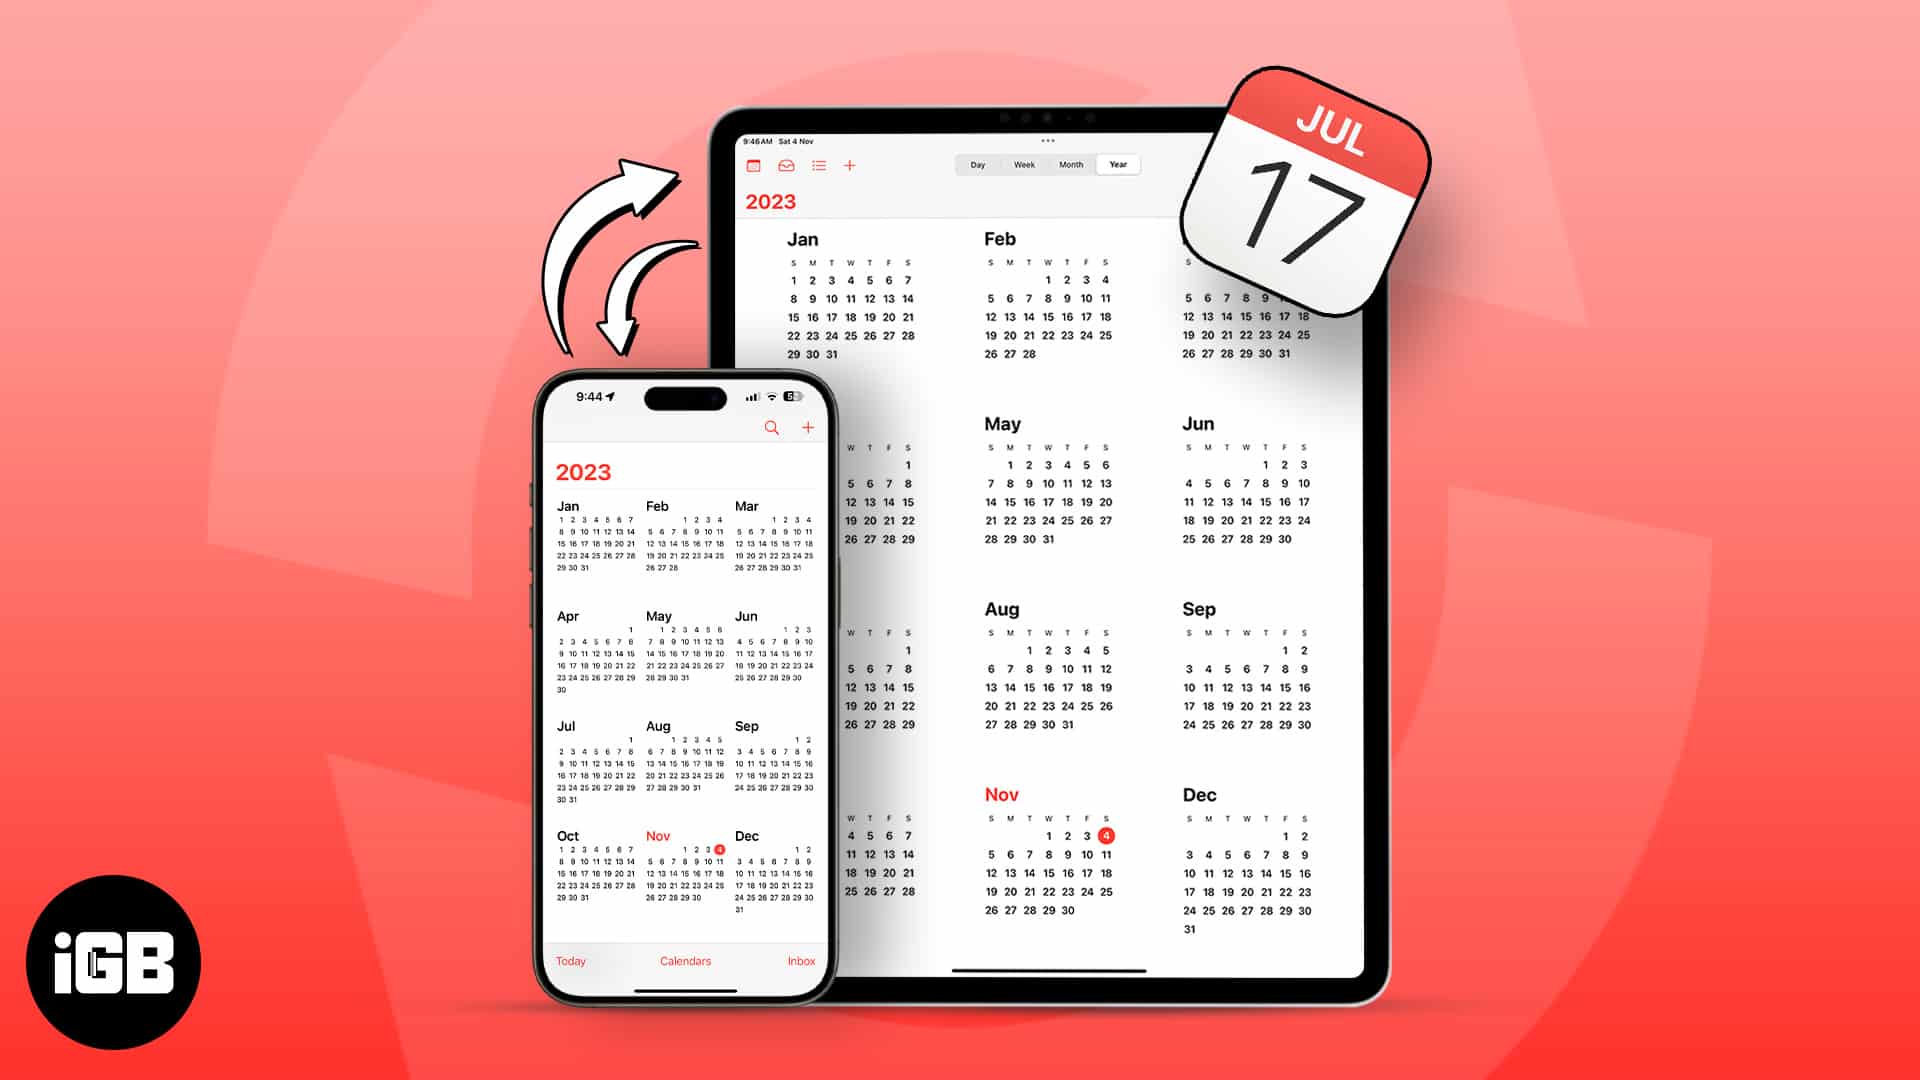 How to share and export calendar from iphone or ipad